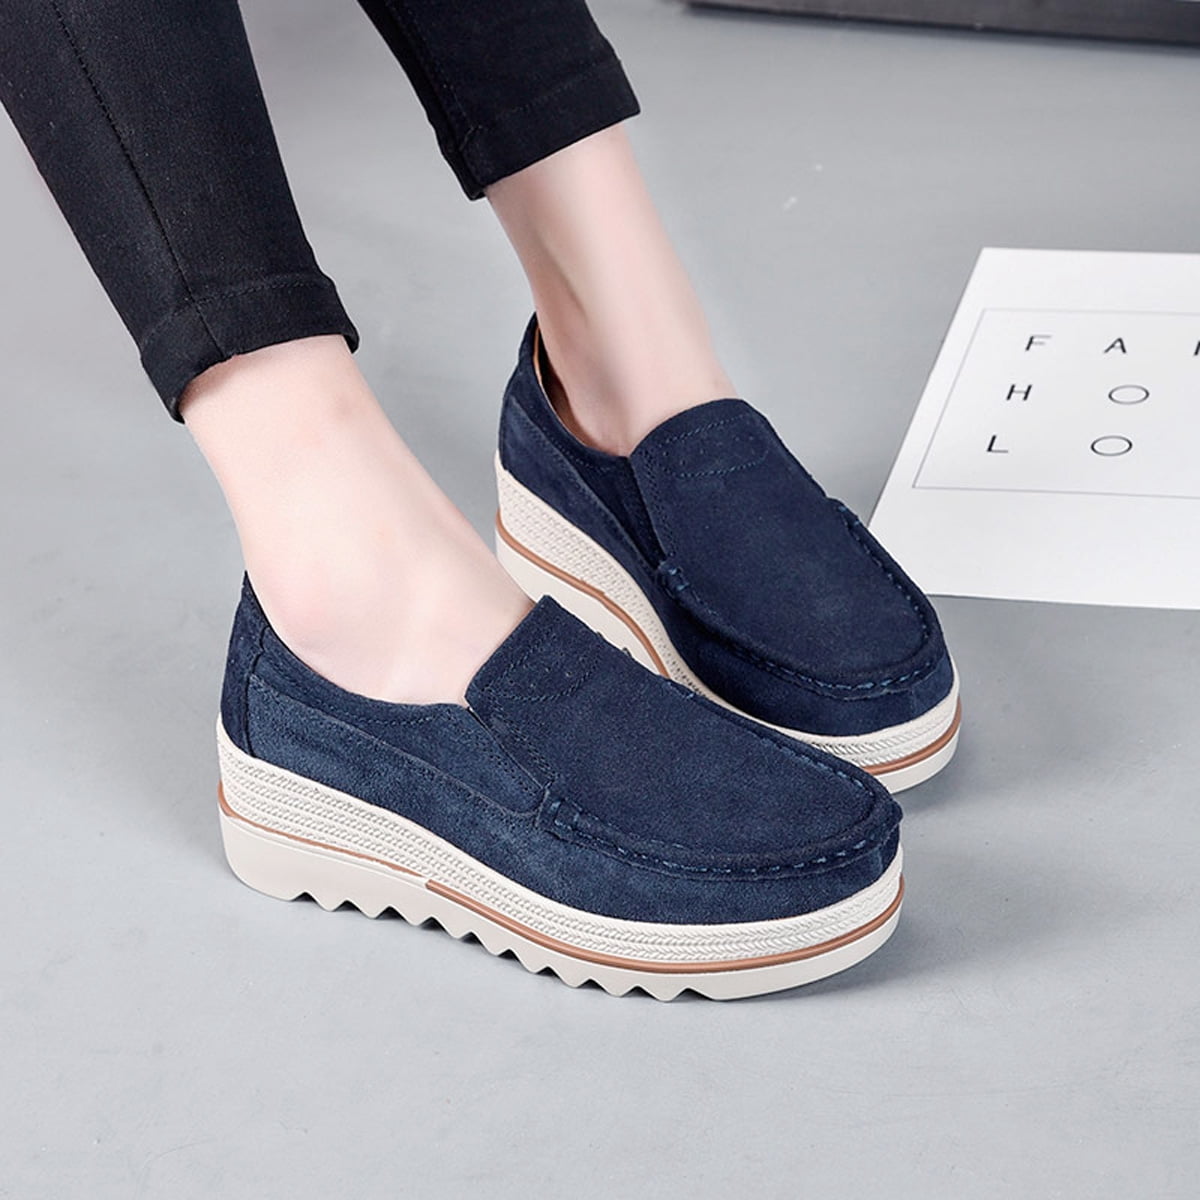 Fashion Women Shake Shoes Suede Leather 